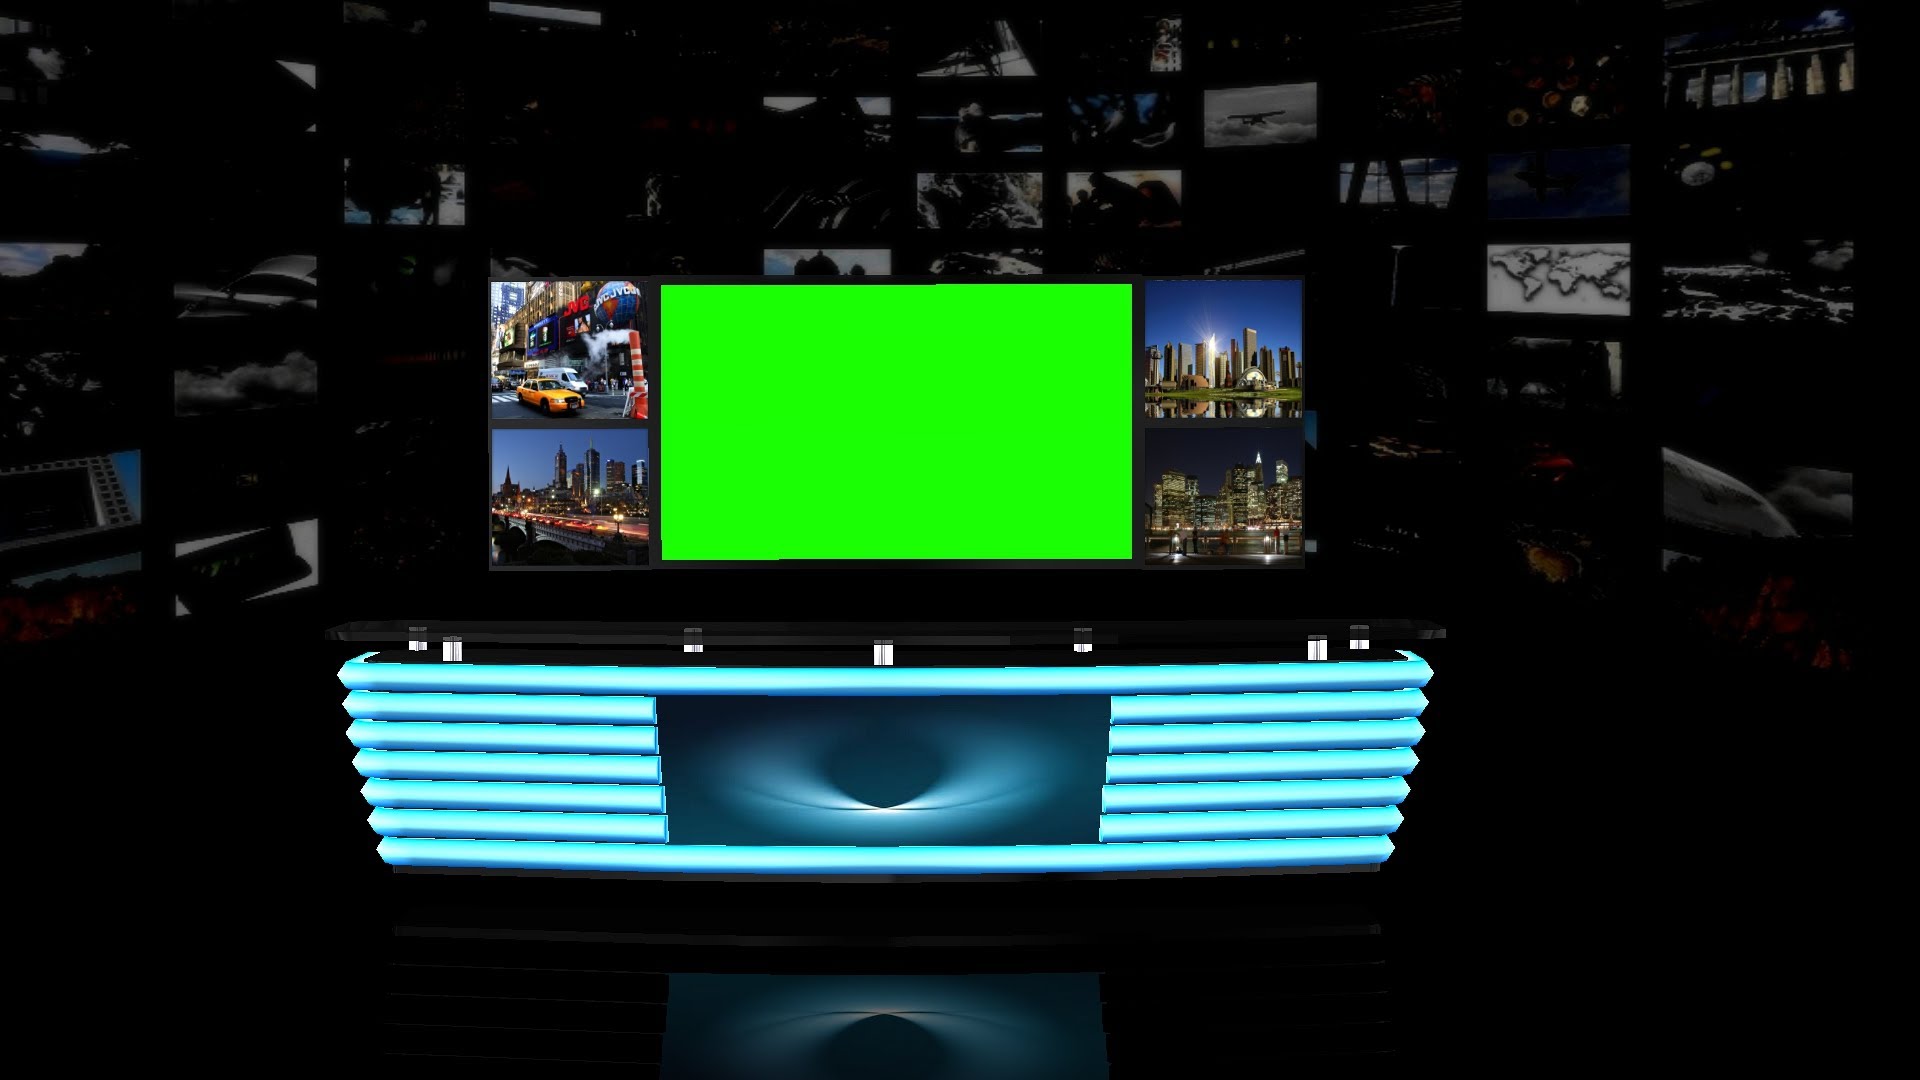 free downloadable office background images for a green screen